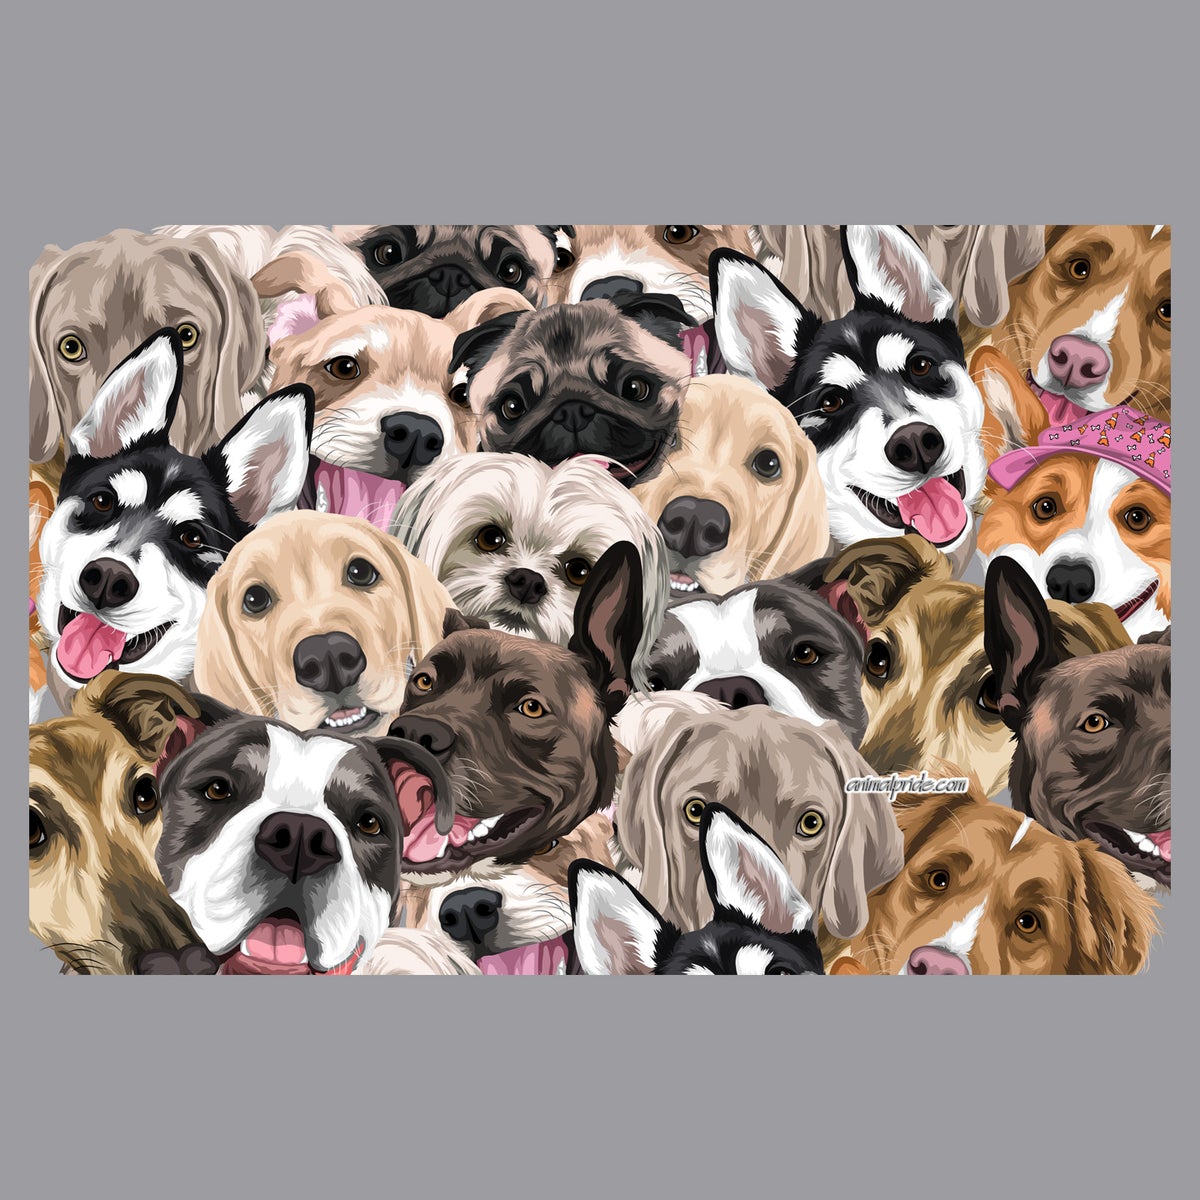 Dog Head Collage Face Mask, Breathable, Resuable, Printed in USA